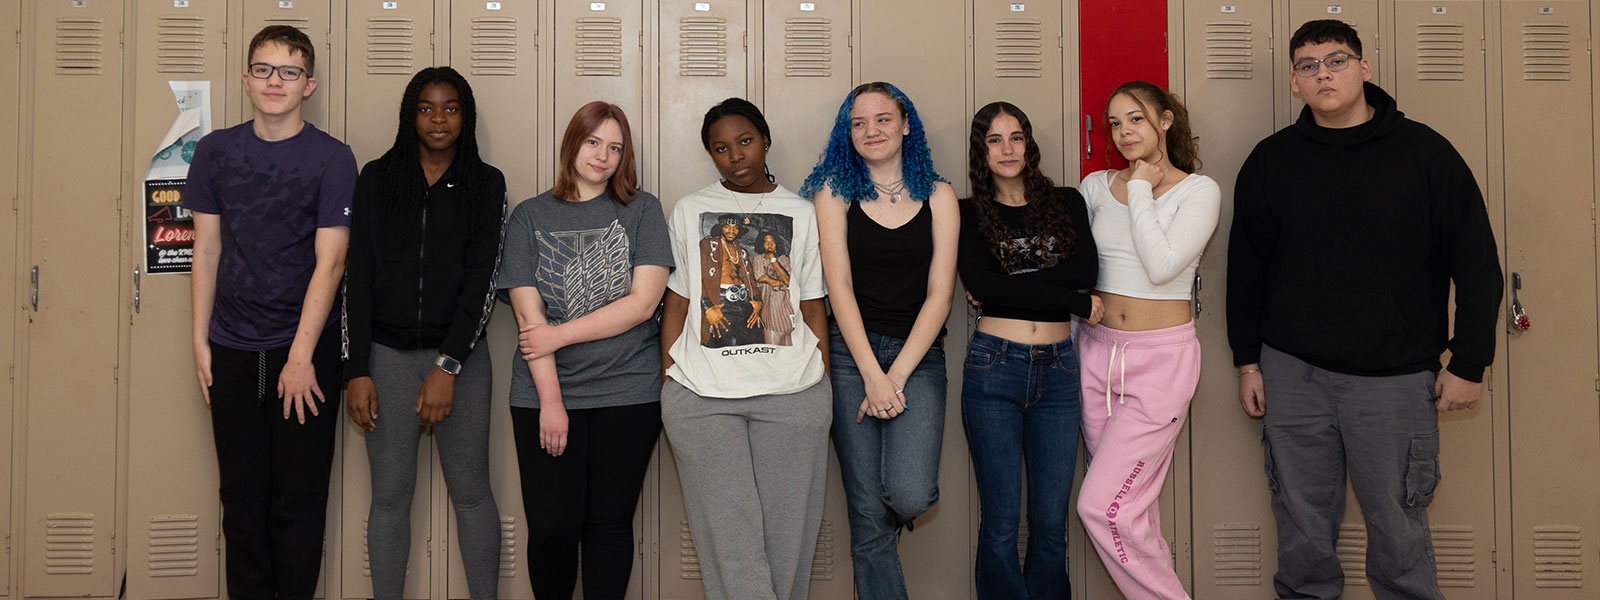 Group of high school students standing by lockers